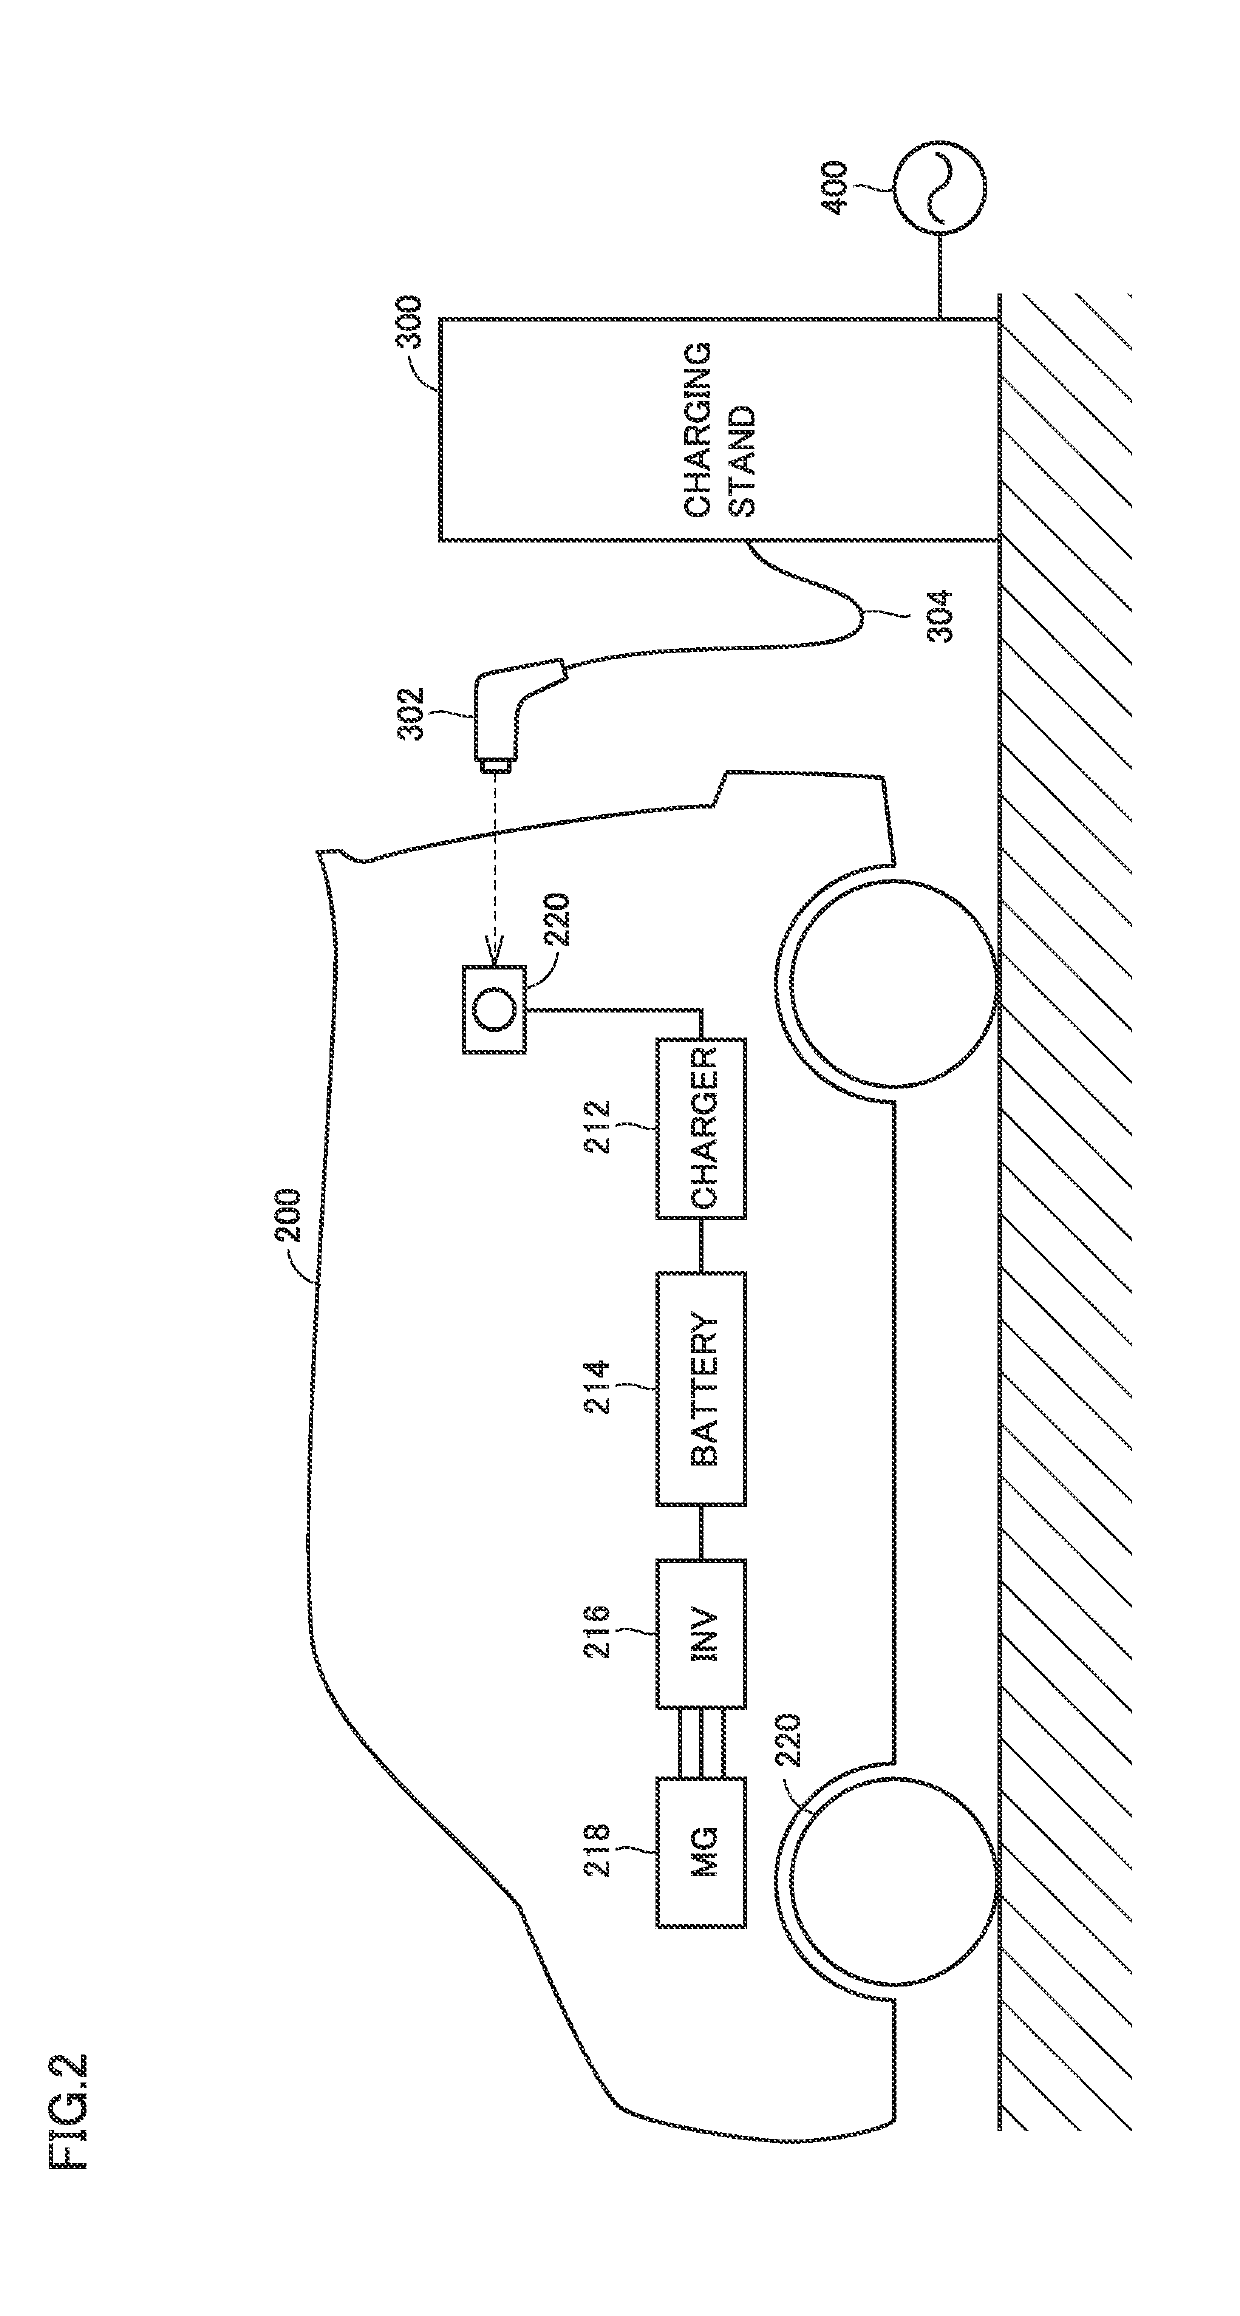 Rental fee setting apparatus, method and system